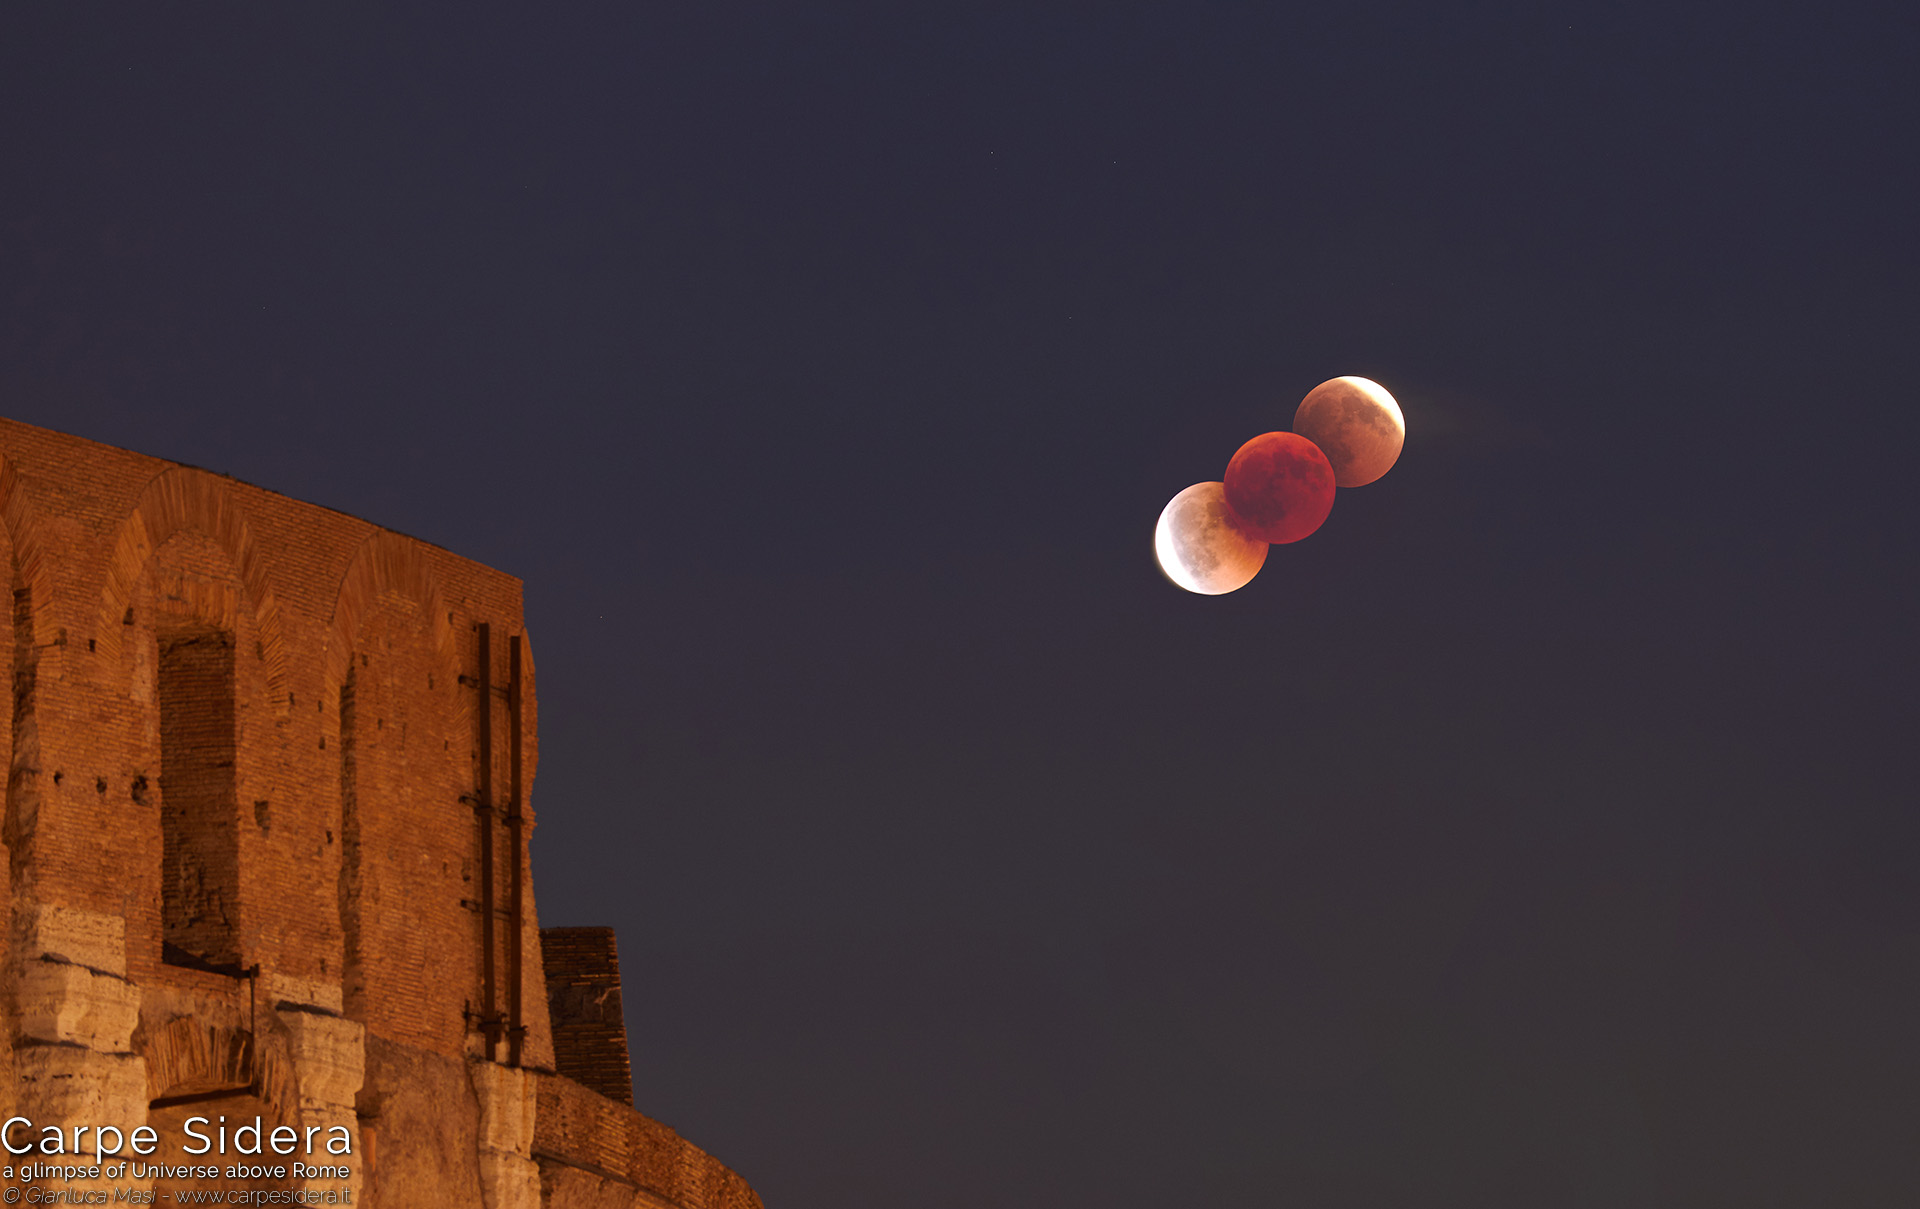 5. The 27 July 2018 total lunar eclipse beside the Colosseum.